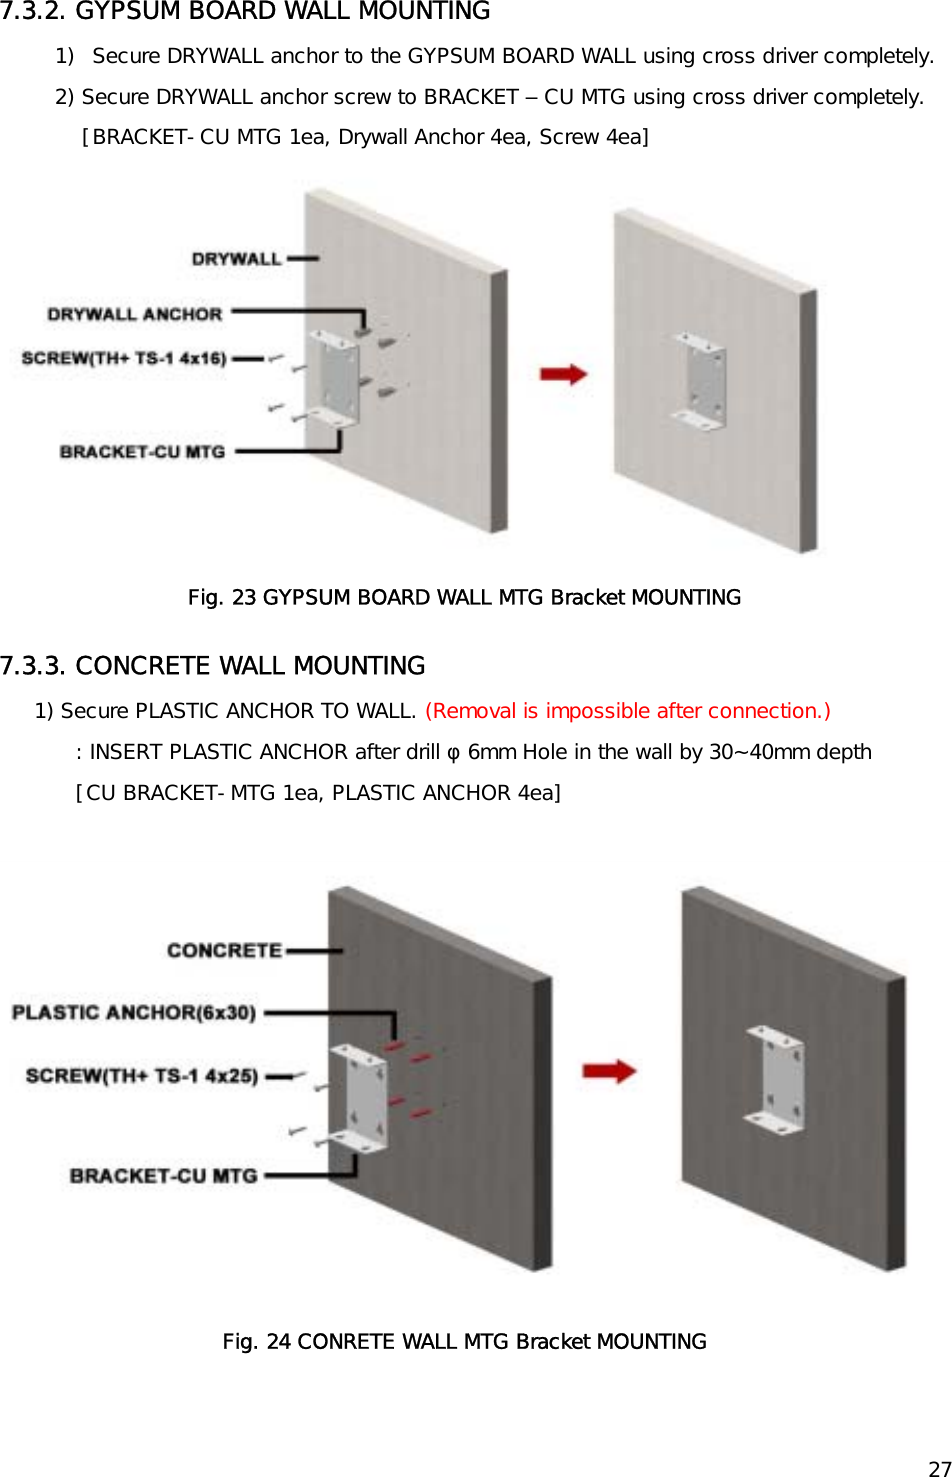   277.3.2. GYPSUM BOARD WALL MOUNTING 1)  Secure DRYWALL anchor to the GYPSUM BOARD WALL using cross driver completely. 2) Secure DRYWALL anchor screw to BRACKET – CU MTG using cross driver completely.  [BRACKET-CU MTG 1ea, Drywall Anchor 4ea, Screw 4ea]  Fig. 23 GYPSUM BOARD WALL MTG Bracket MOUNTING 7.3.3. CONCRETE WALL MOUNTING 1) Secure PLASTIC ANCHOR TO WALL. (Removal is impossible after connection.) : INSERT PLASTIC ANCHOR after drill φ 6mm Hole in the wall by 30~40mm depth  [CU BRACKET-MTG 1ea, PLASTIC ANCHOR 4ea]                 Fig. 24 CONRETE WALL MTG Bracket MOUNTING  